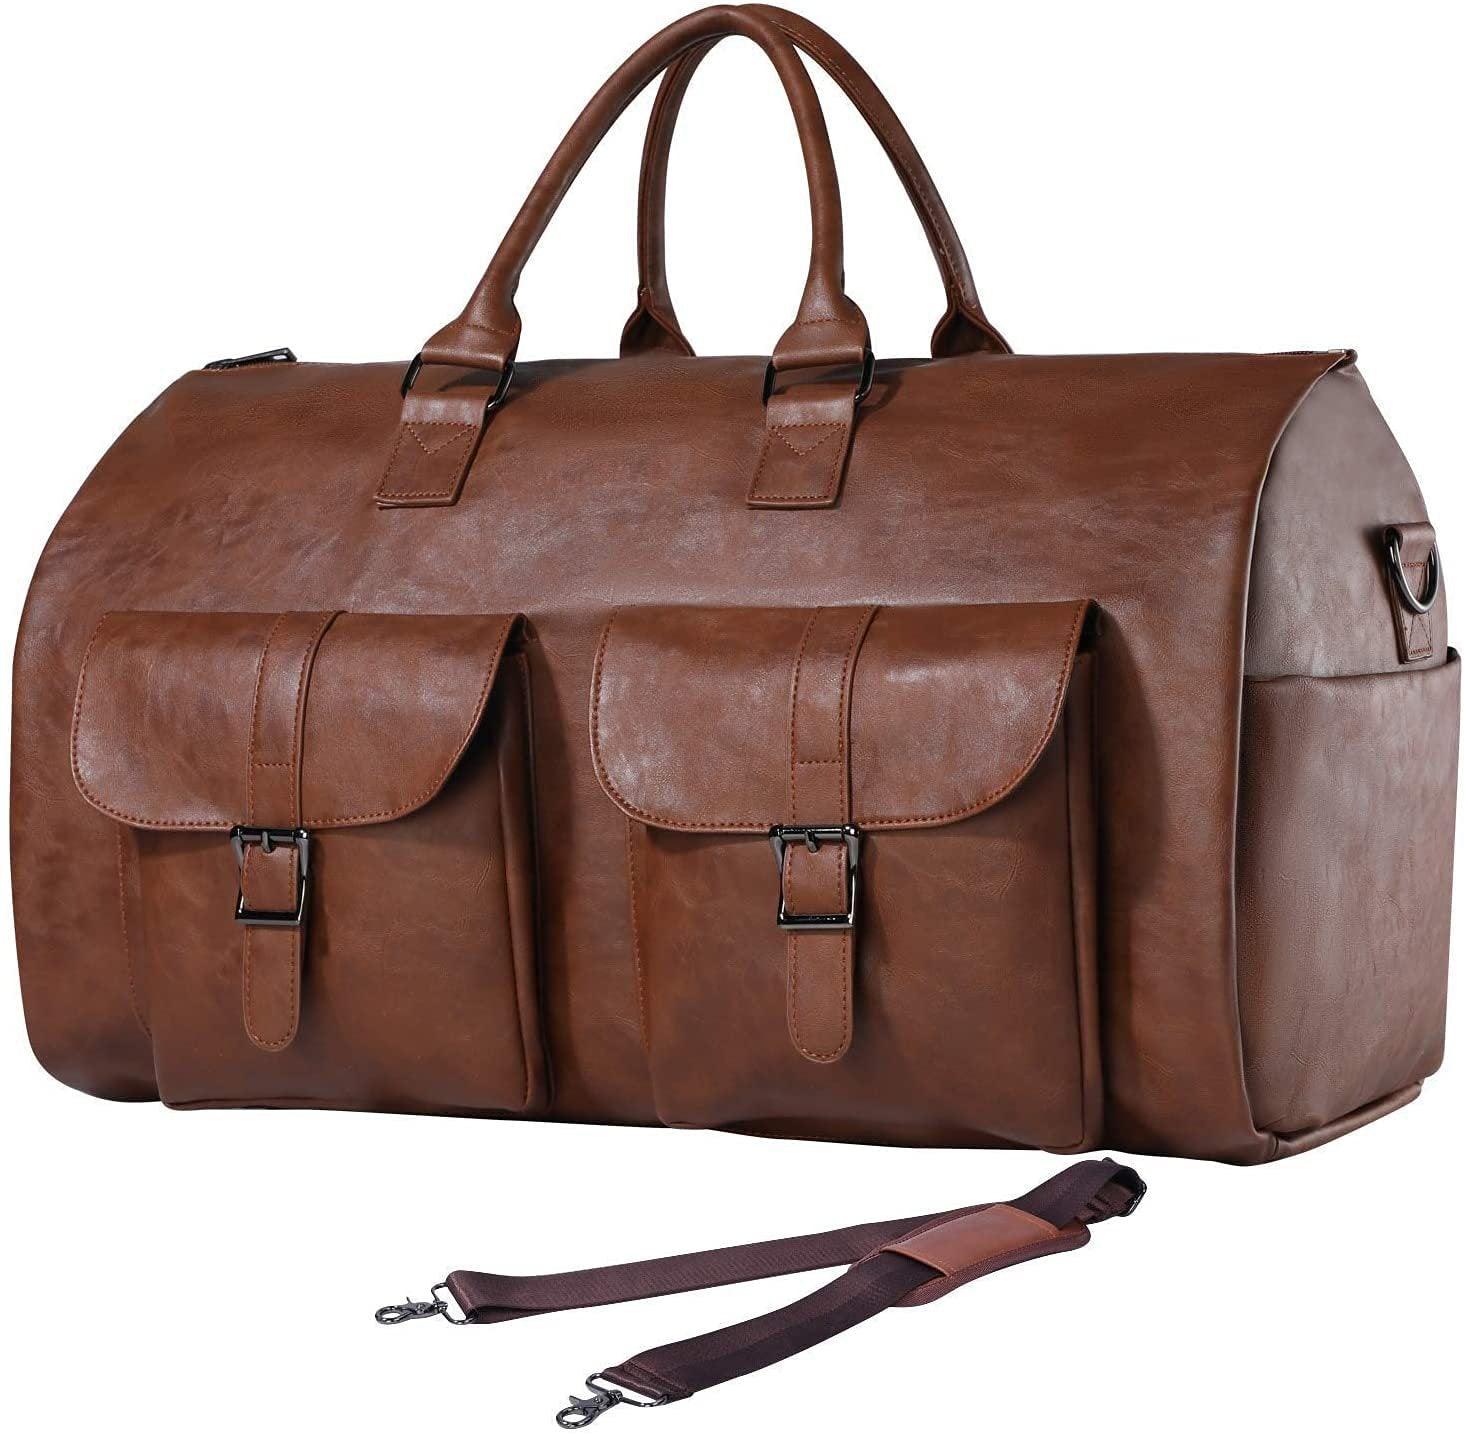 Convertible Duffle Garment Bag Promotion-with-start10 - Leather-Brown - hideabTest - CozyBuys